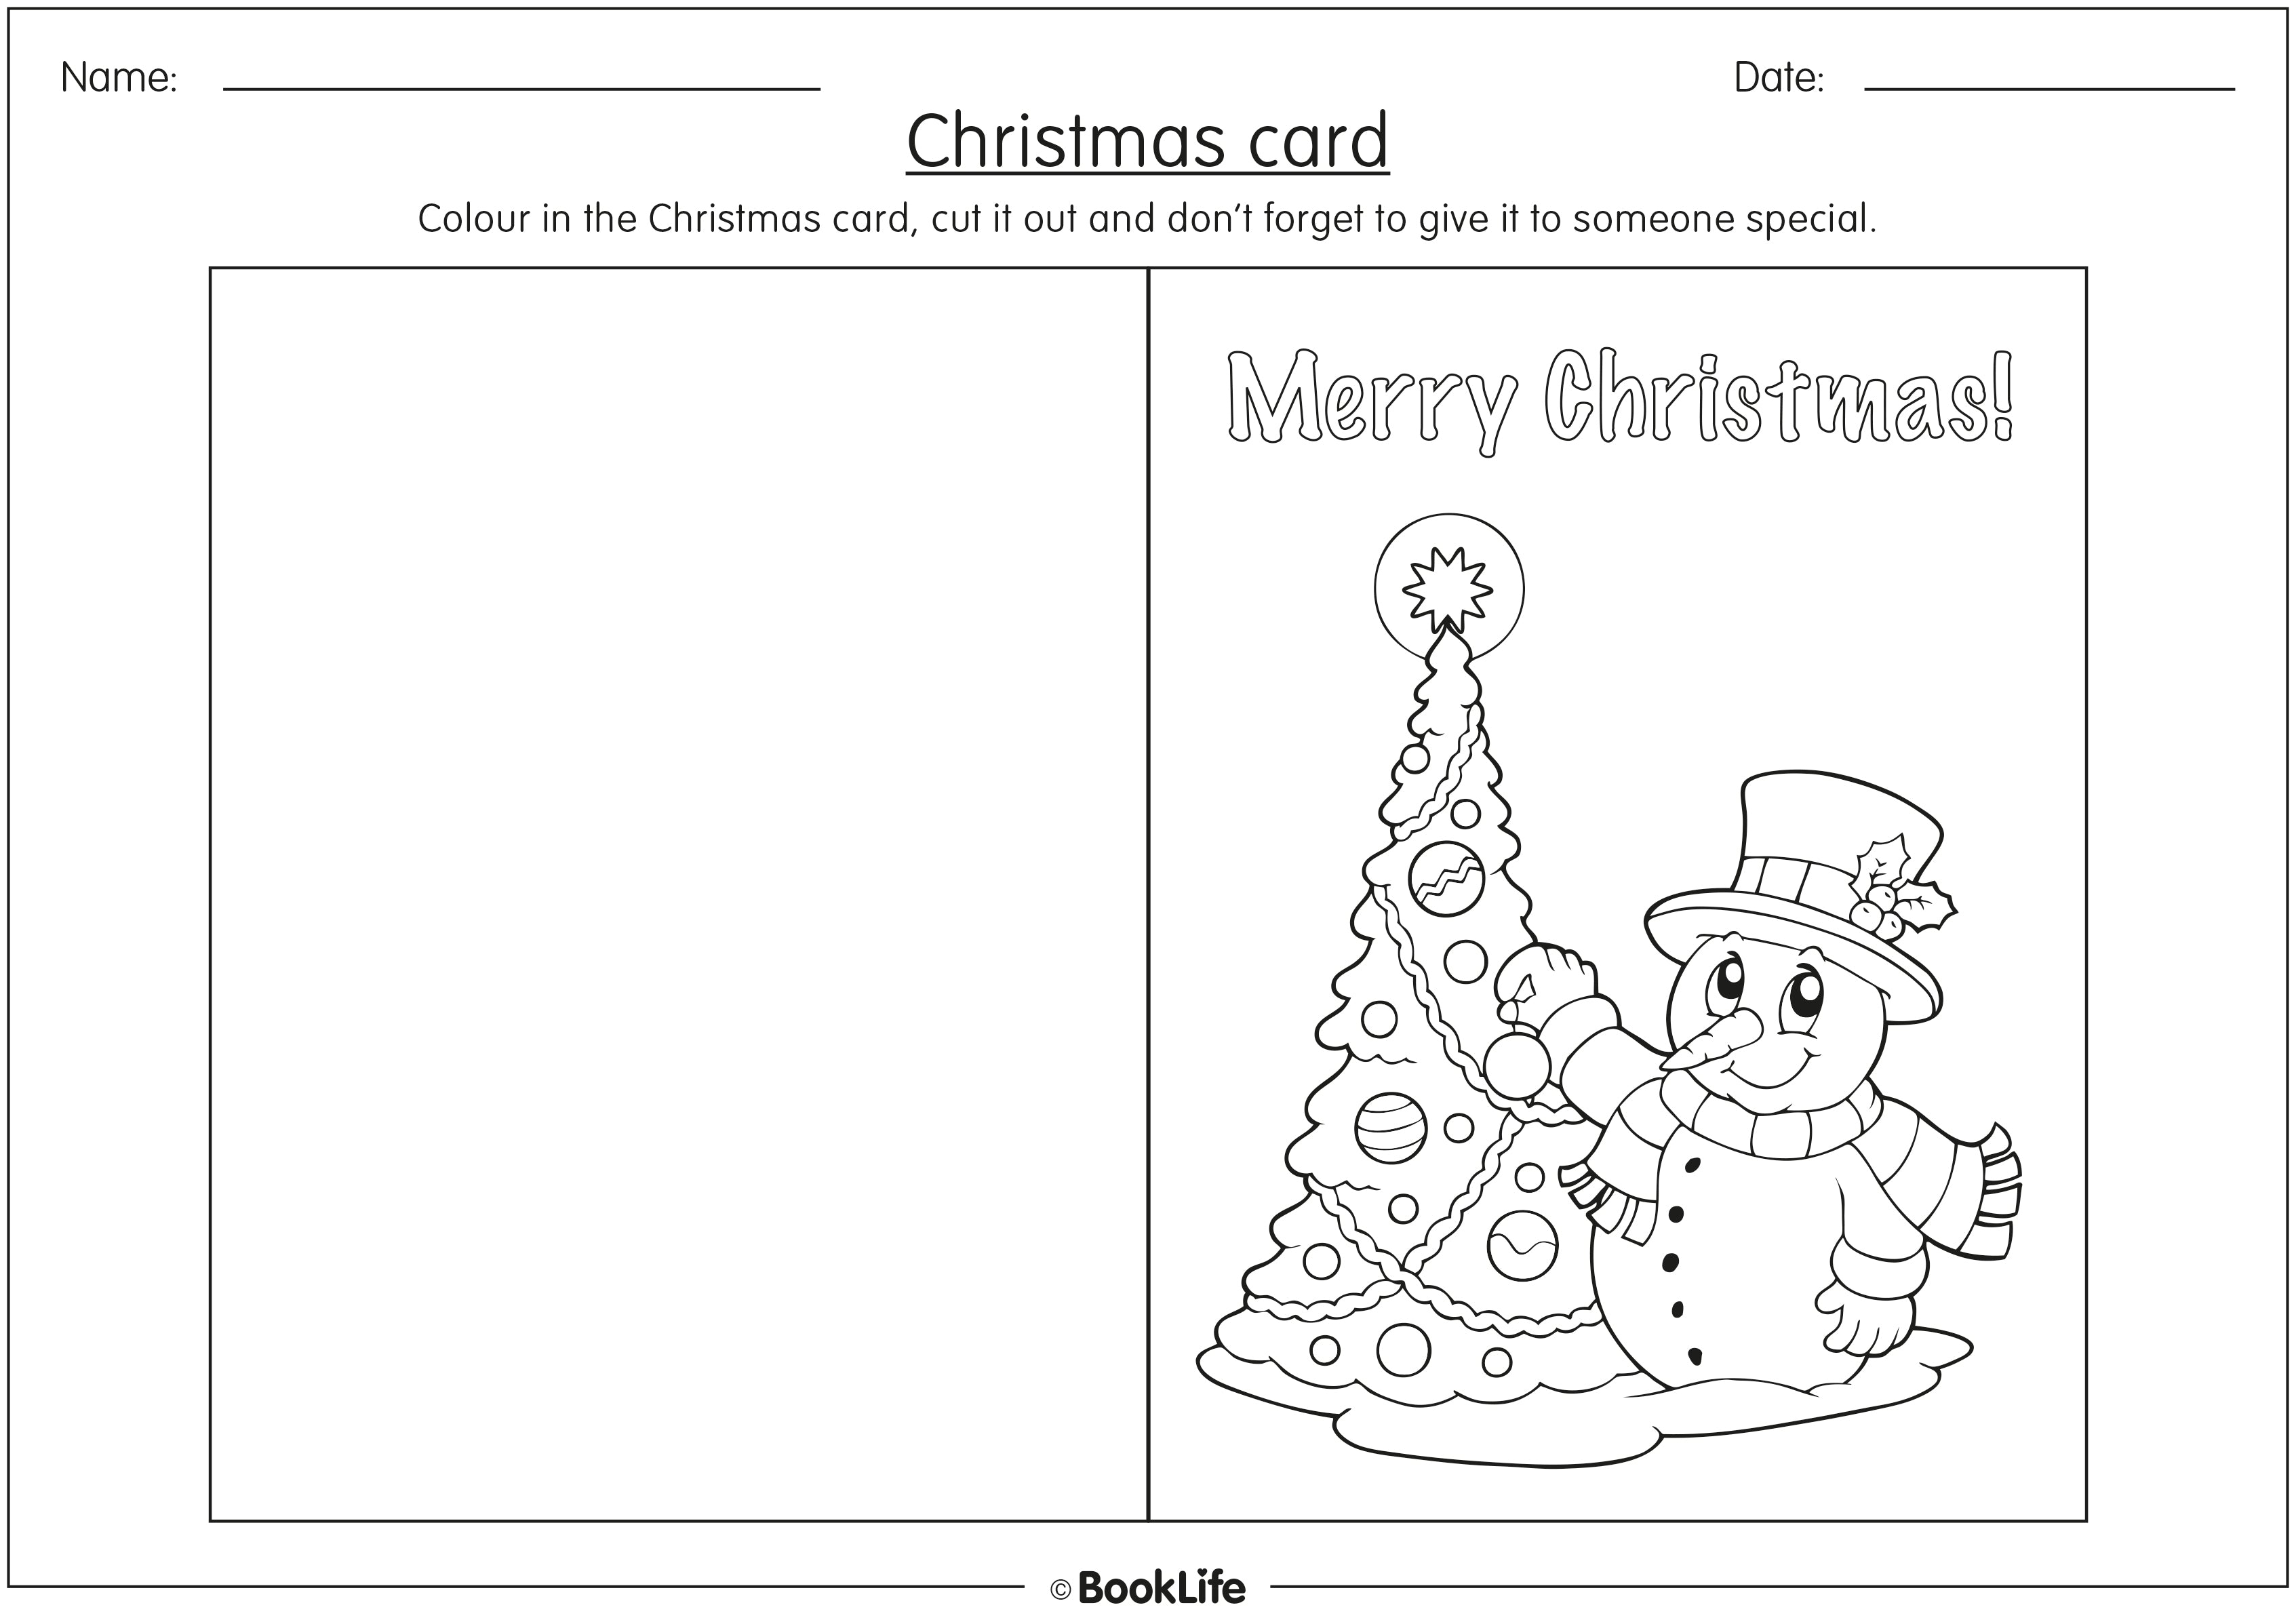 Colour in Christmas Card Activity Sheet by BookLife